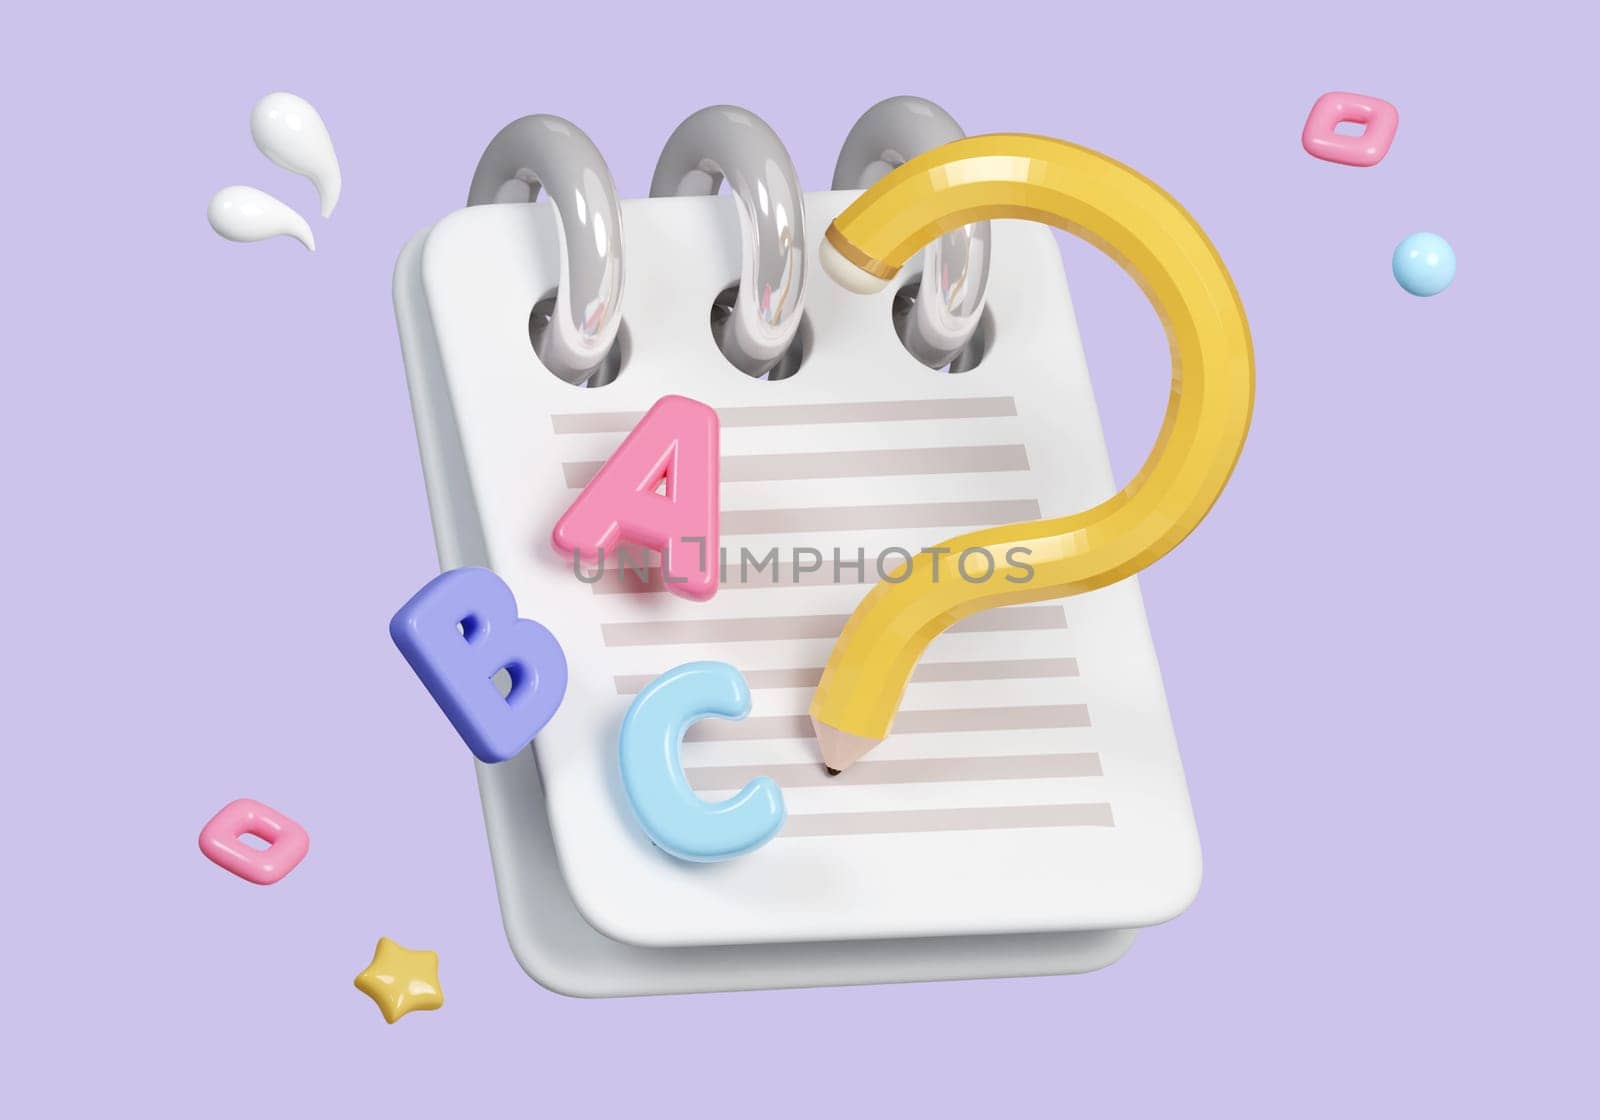 3D exam results paper score 3d icon isolated on pastel background, icon symbol clipping path. education. 3d render illustration by meepiangraphic